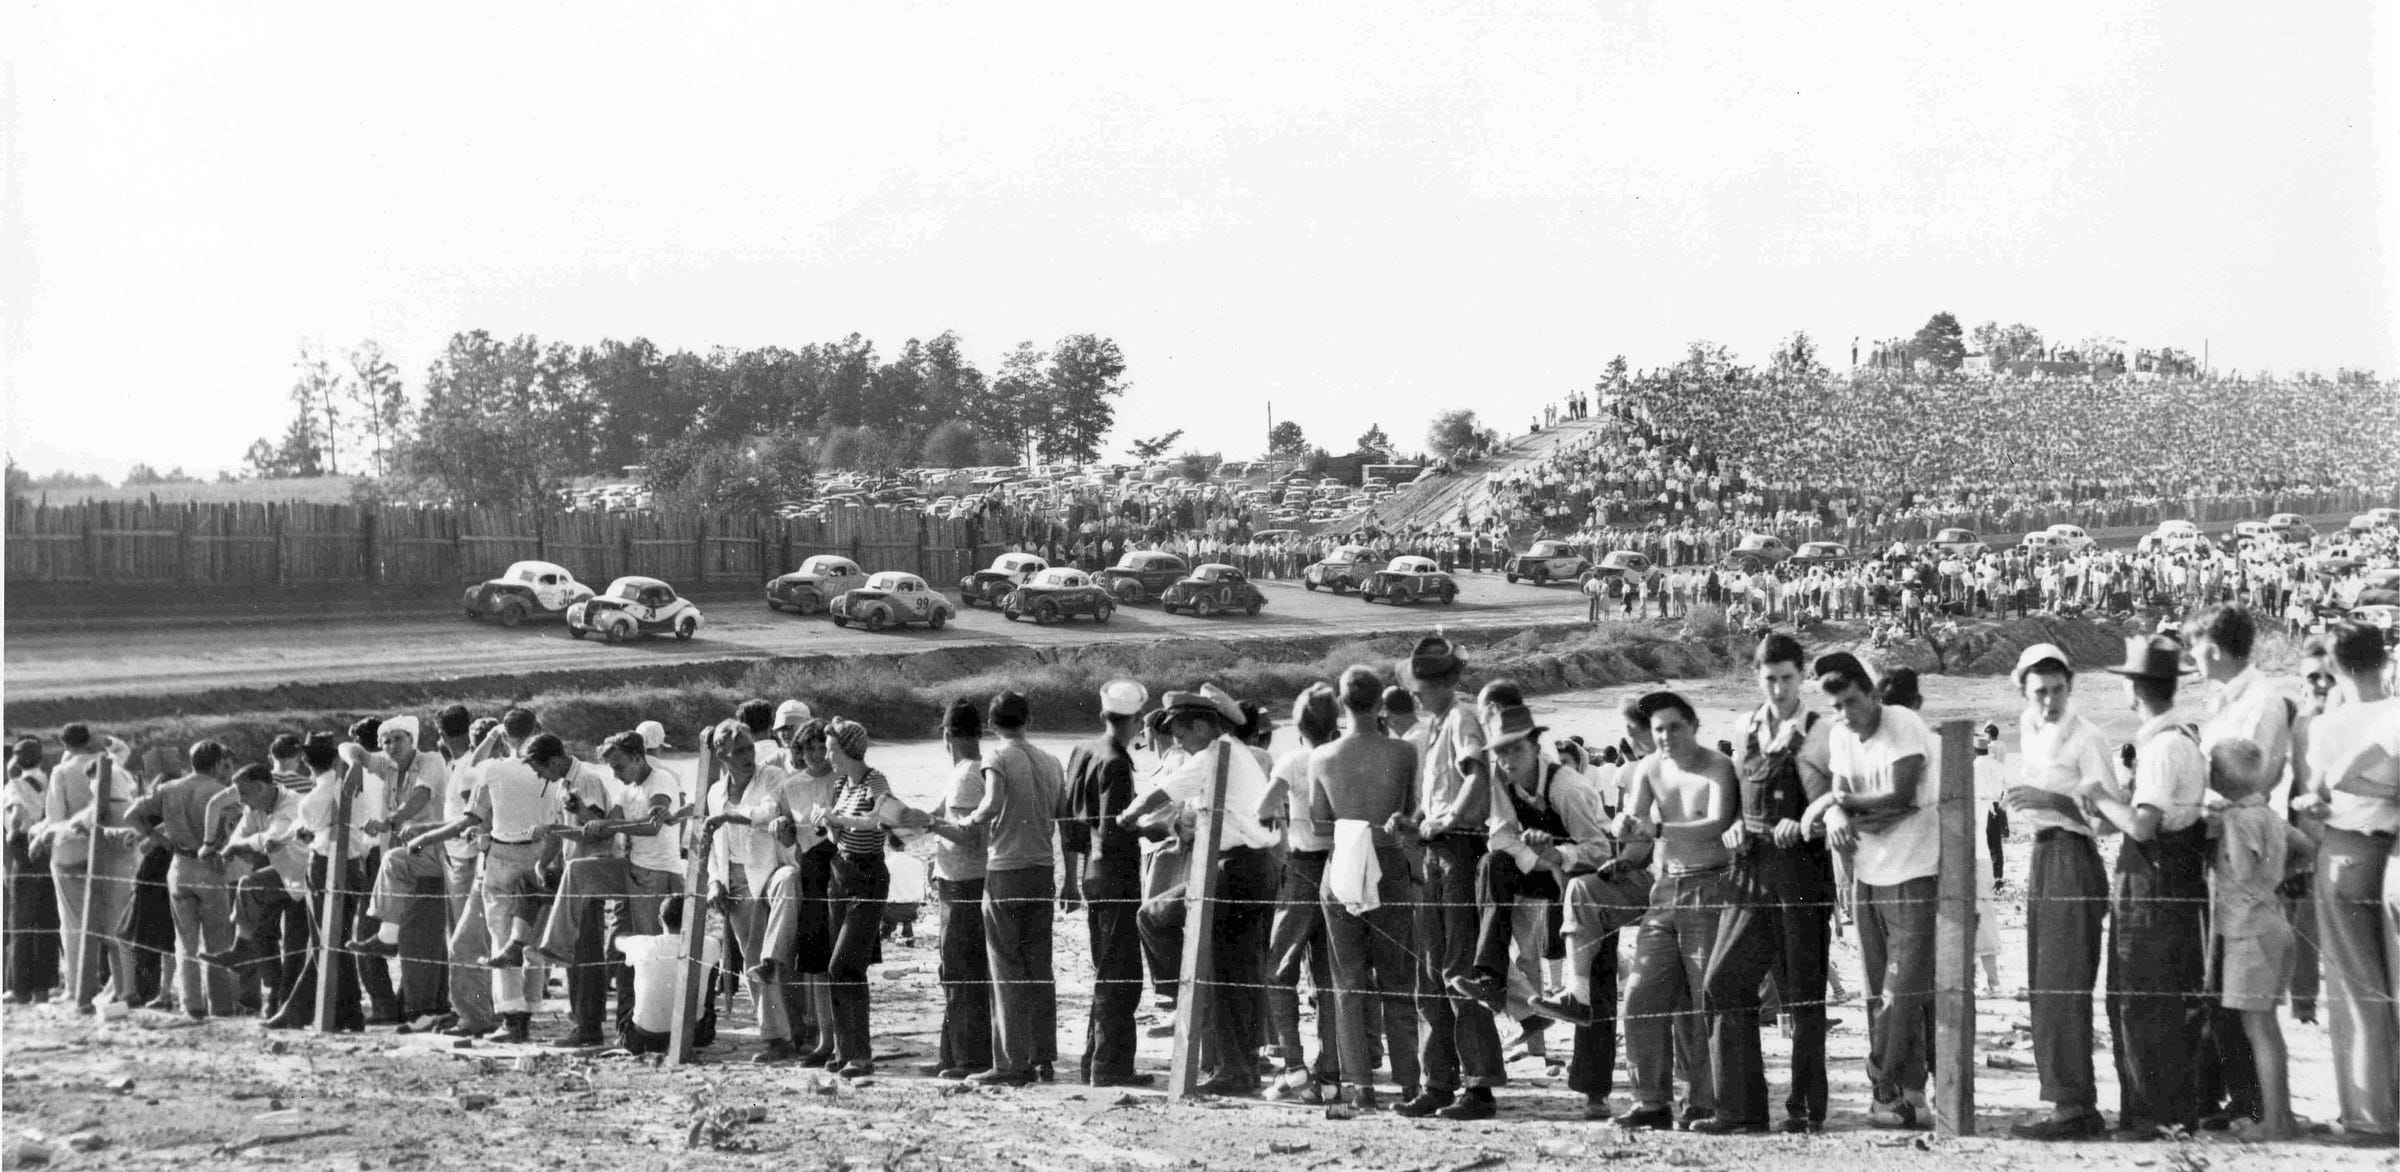 1947 race at the speedway